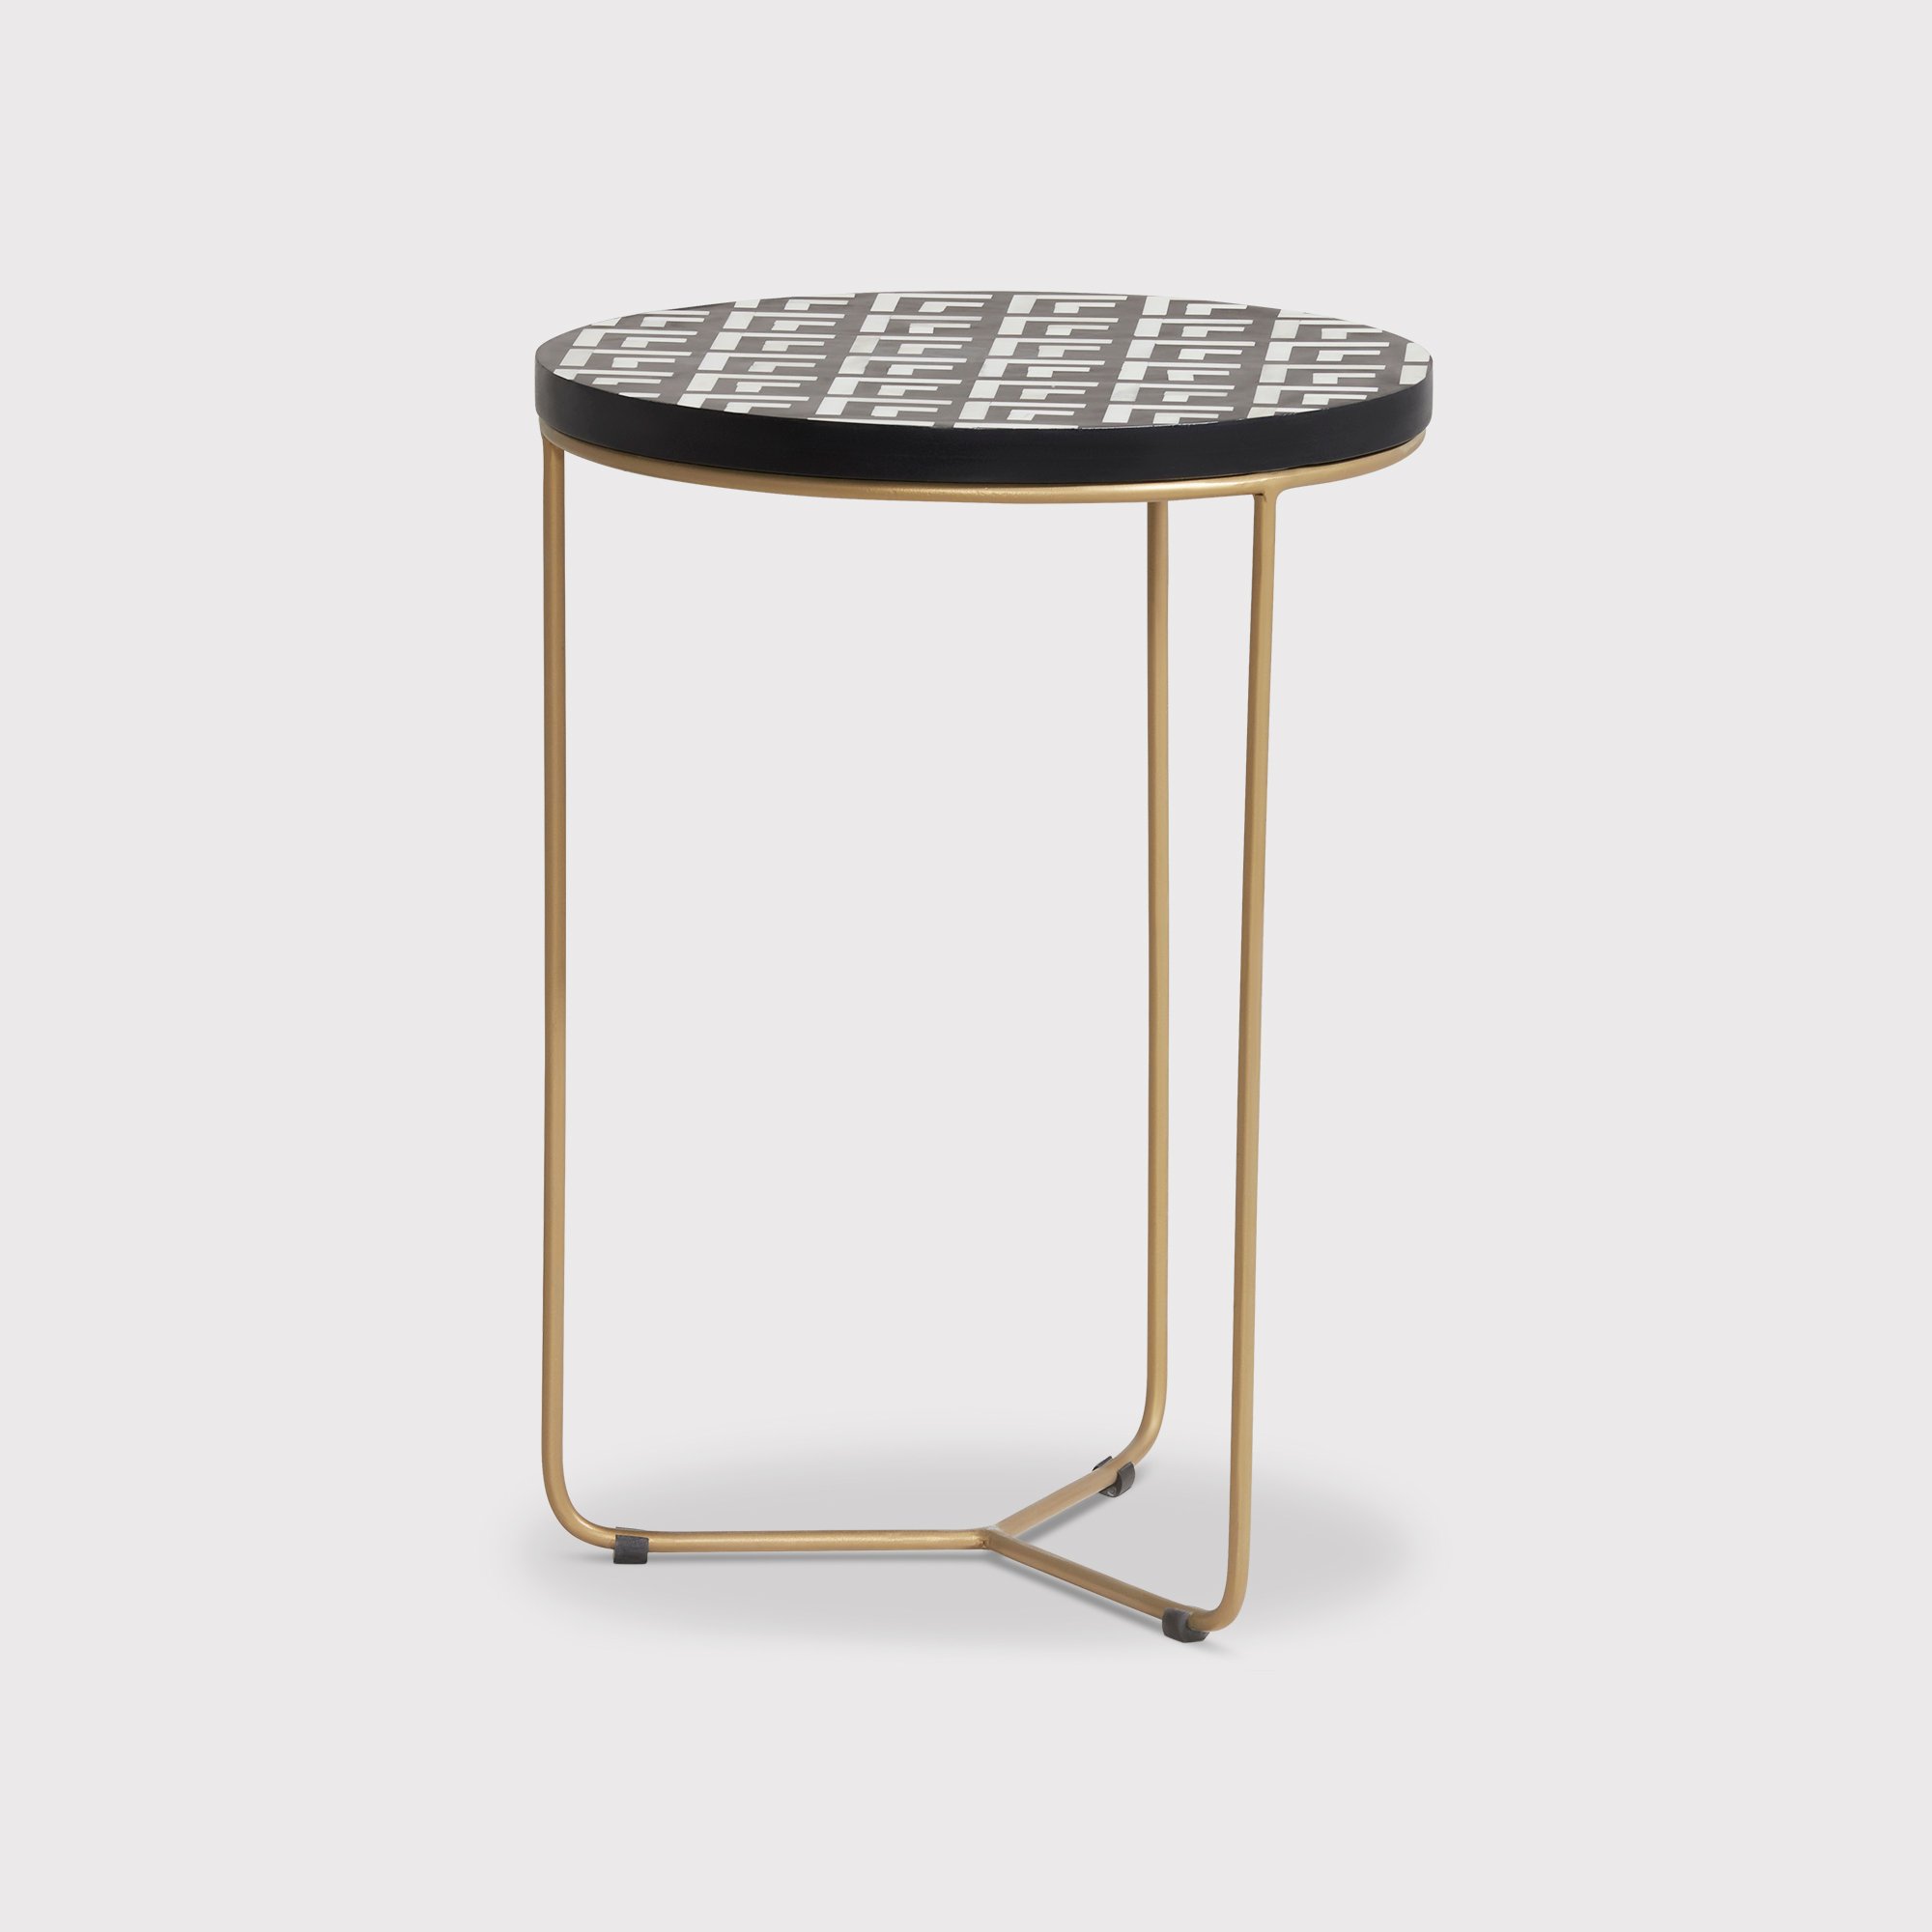 Photo of Amari side table 40cm in round in black